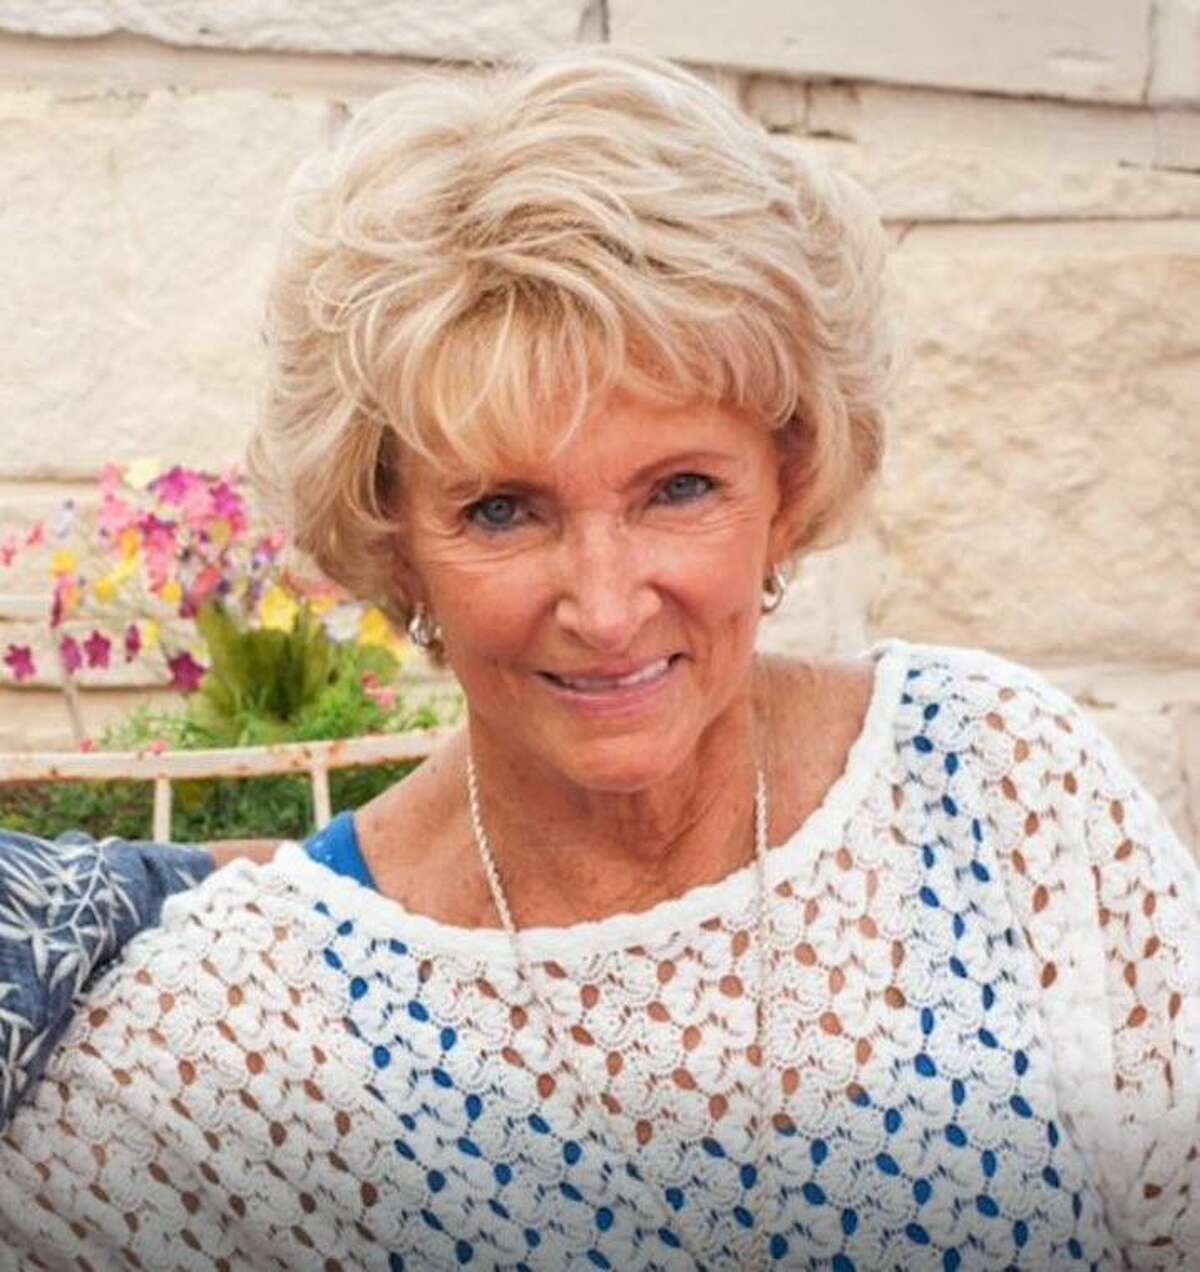 Betty Thomas, an 83-year-old Irving, Texas resident, was murdered in her home in December 2019 by a cable technician employed by Stamford-based Charter Communications. A Texas jury has ordered Charter to pay damages of more than $7 billion in connection with Thomas’ death.